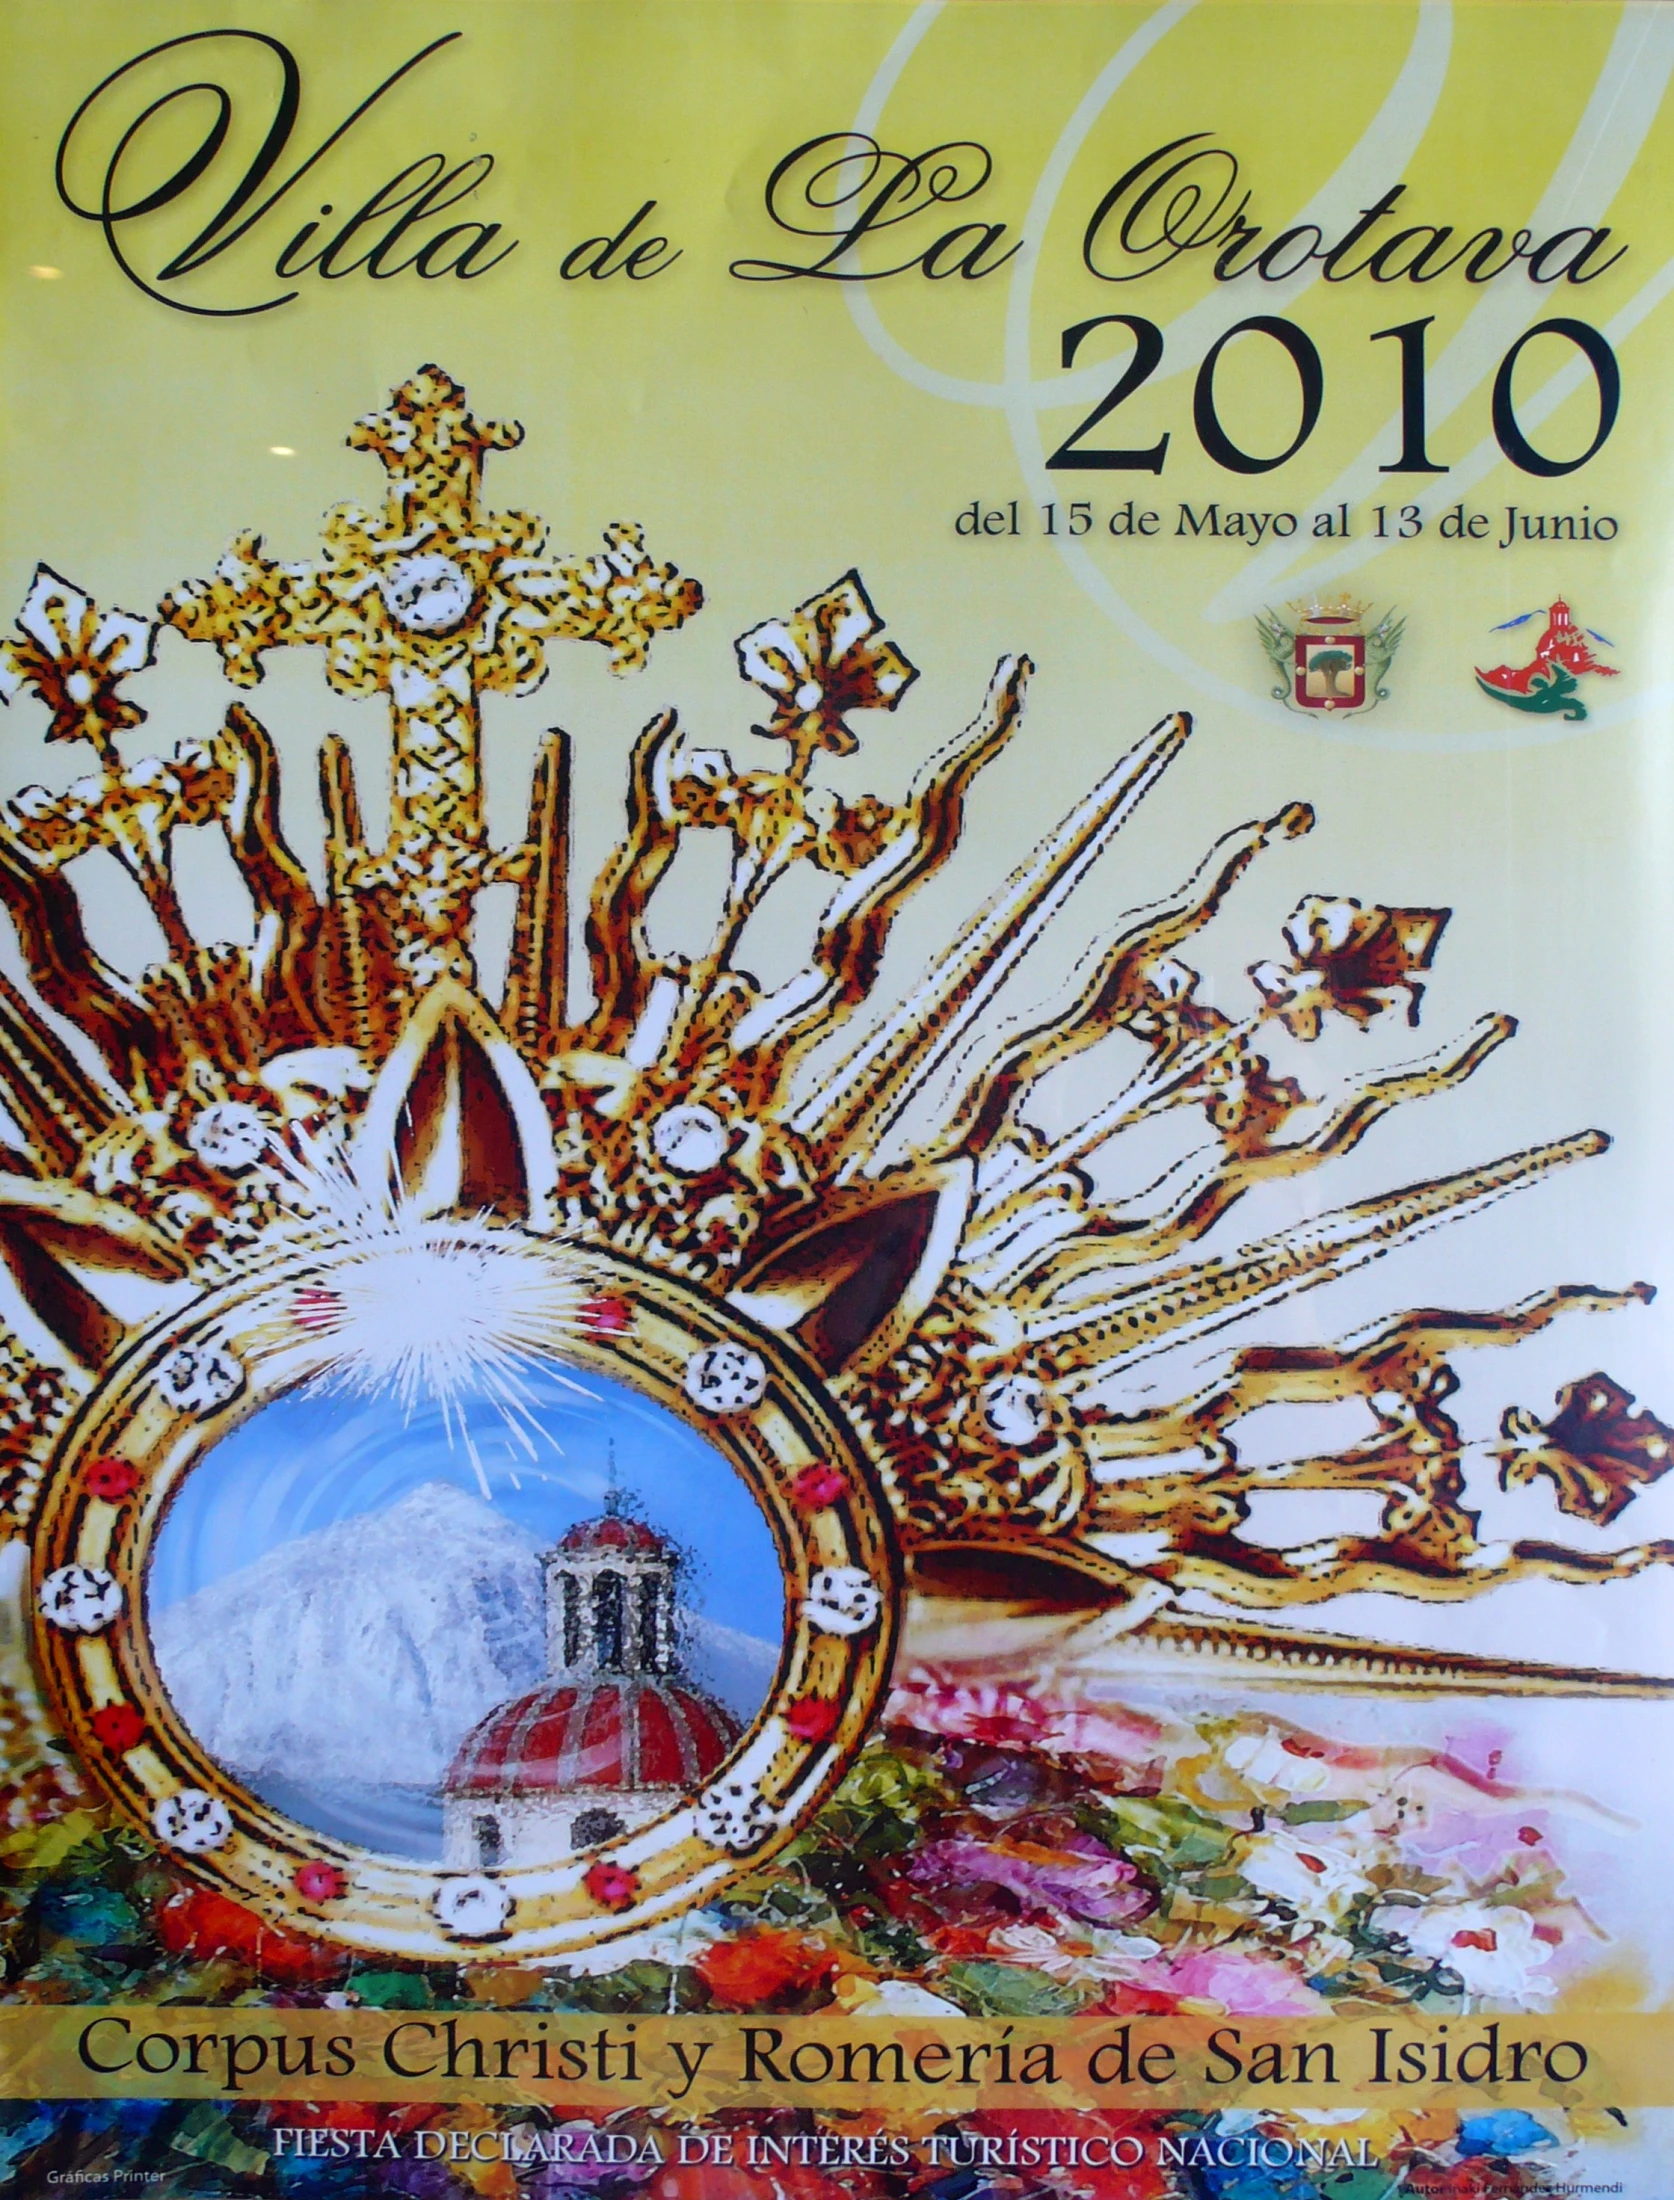 a magazine cover showing a golden crown and people